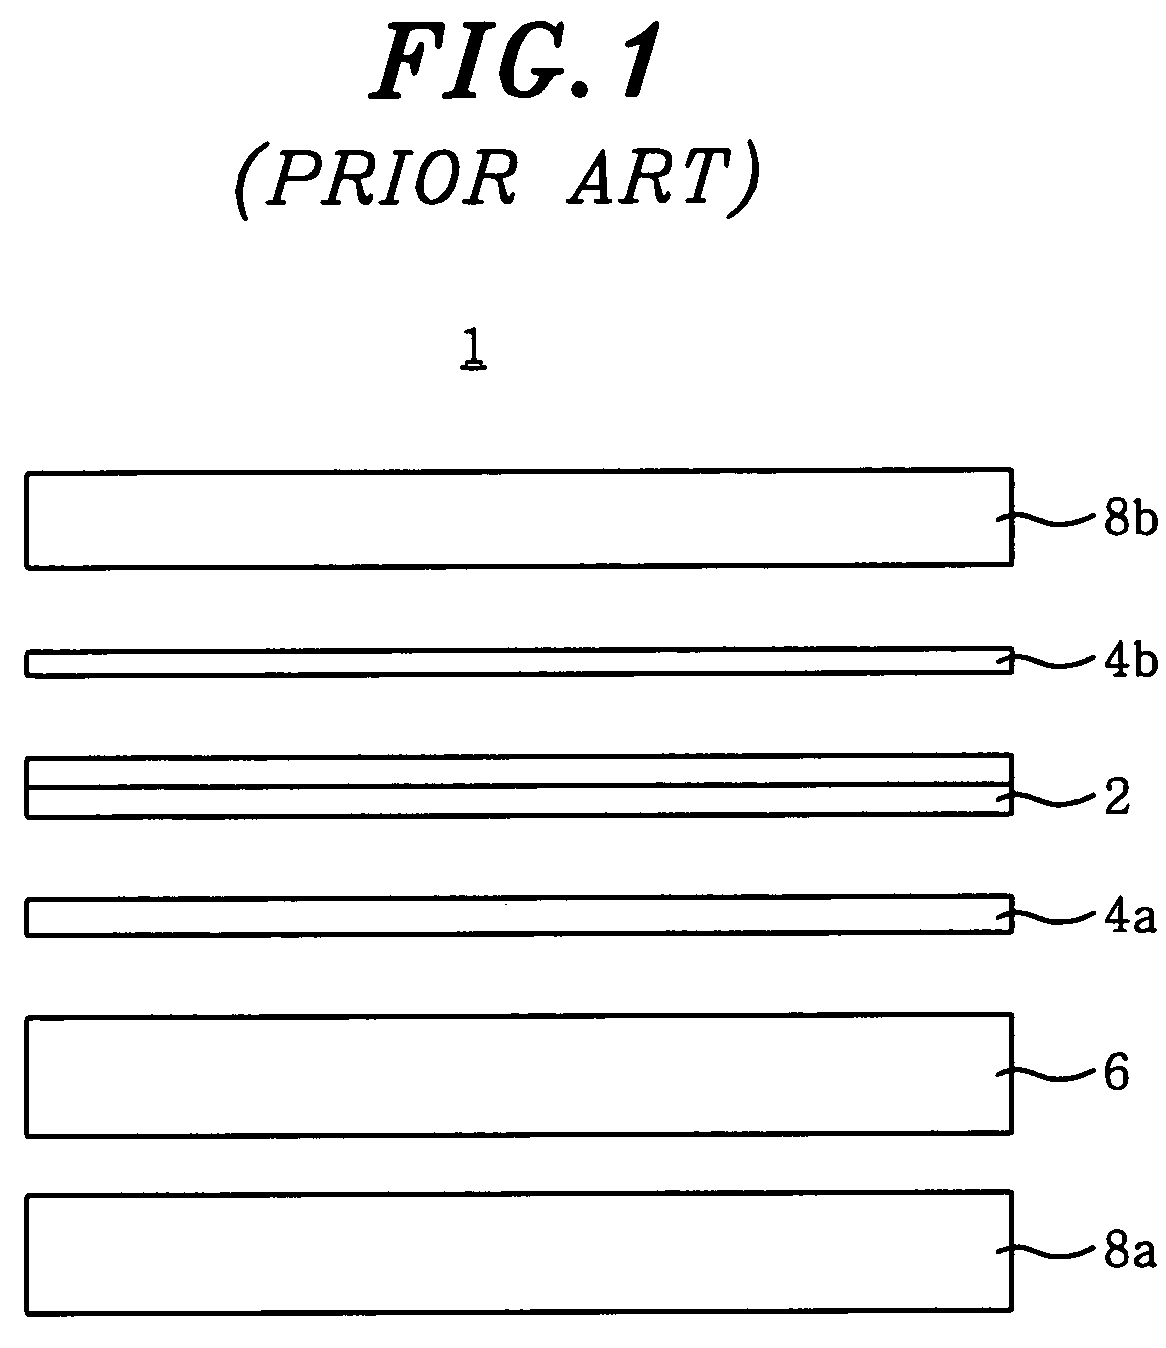 Backlight unit with an oxide compound-laminated optical layer